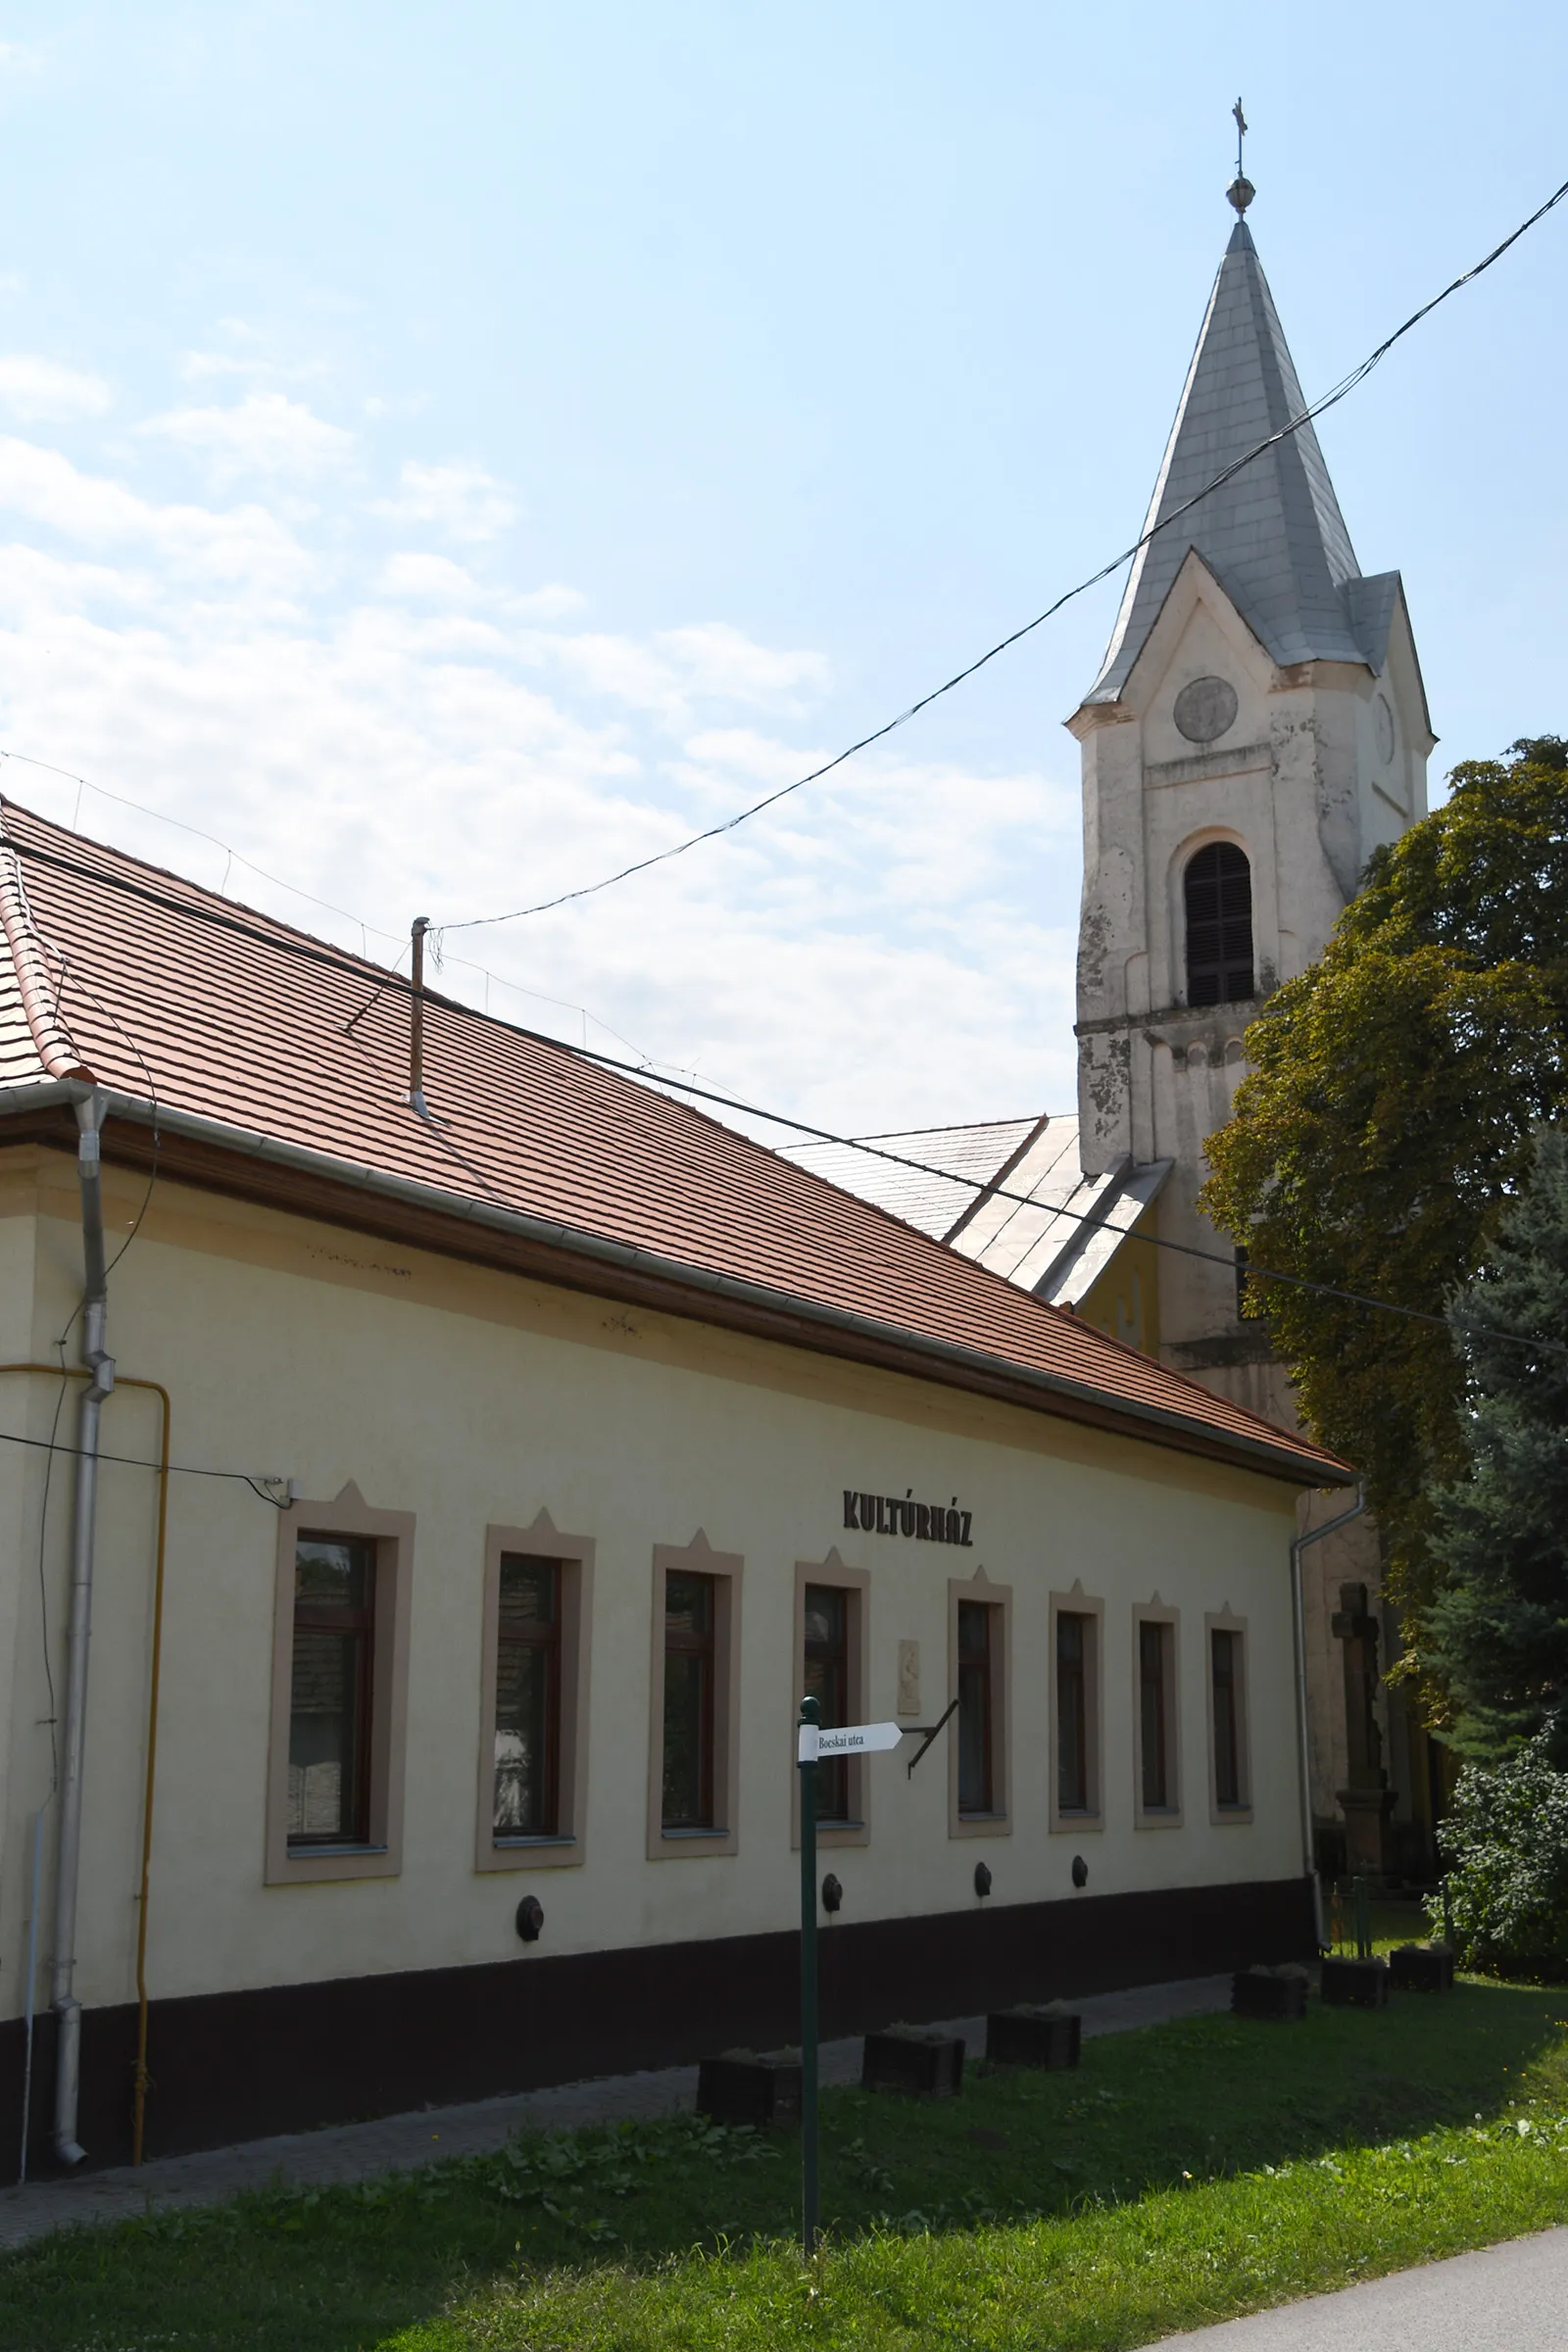 Photo showing: The house of culture and the Roman Catholic church in Négyes, Hungary